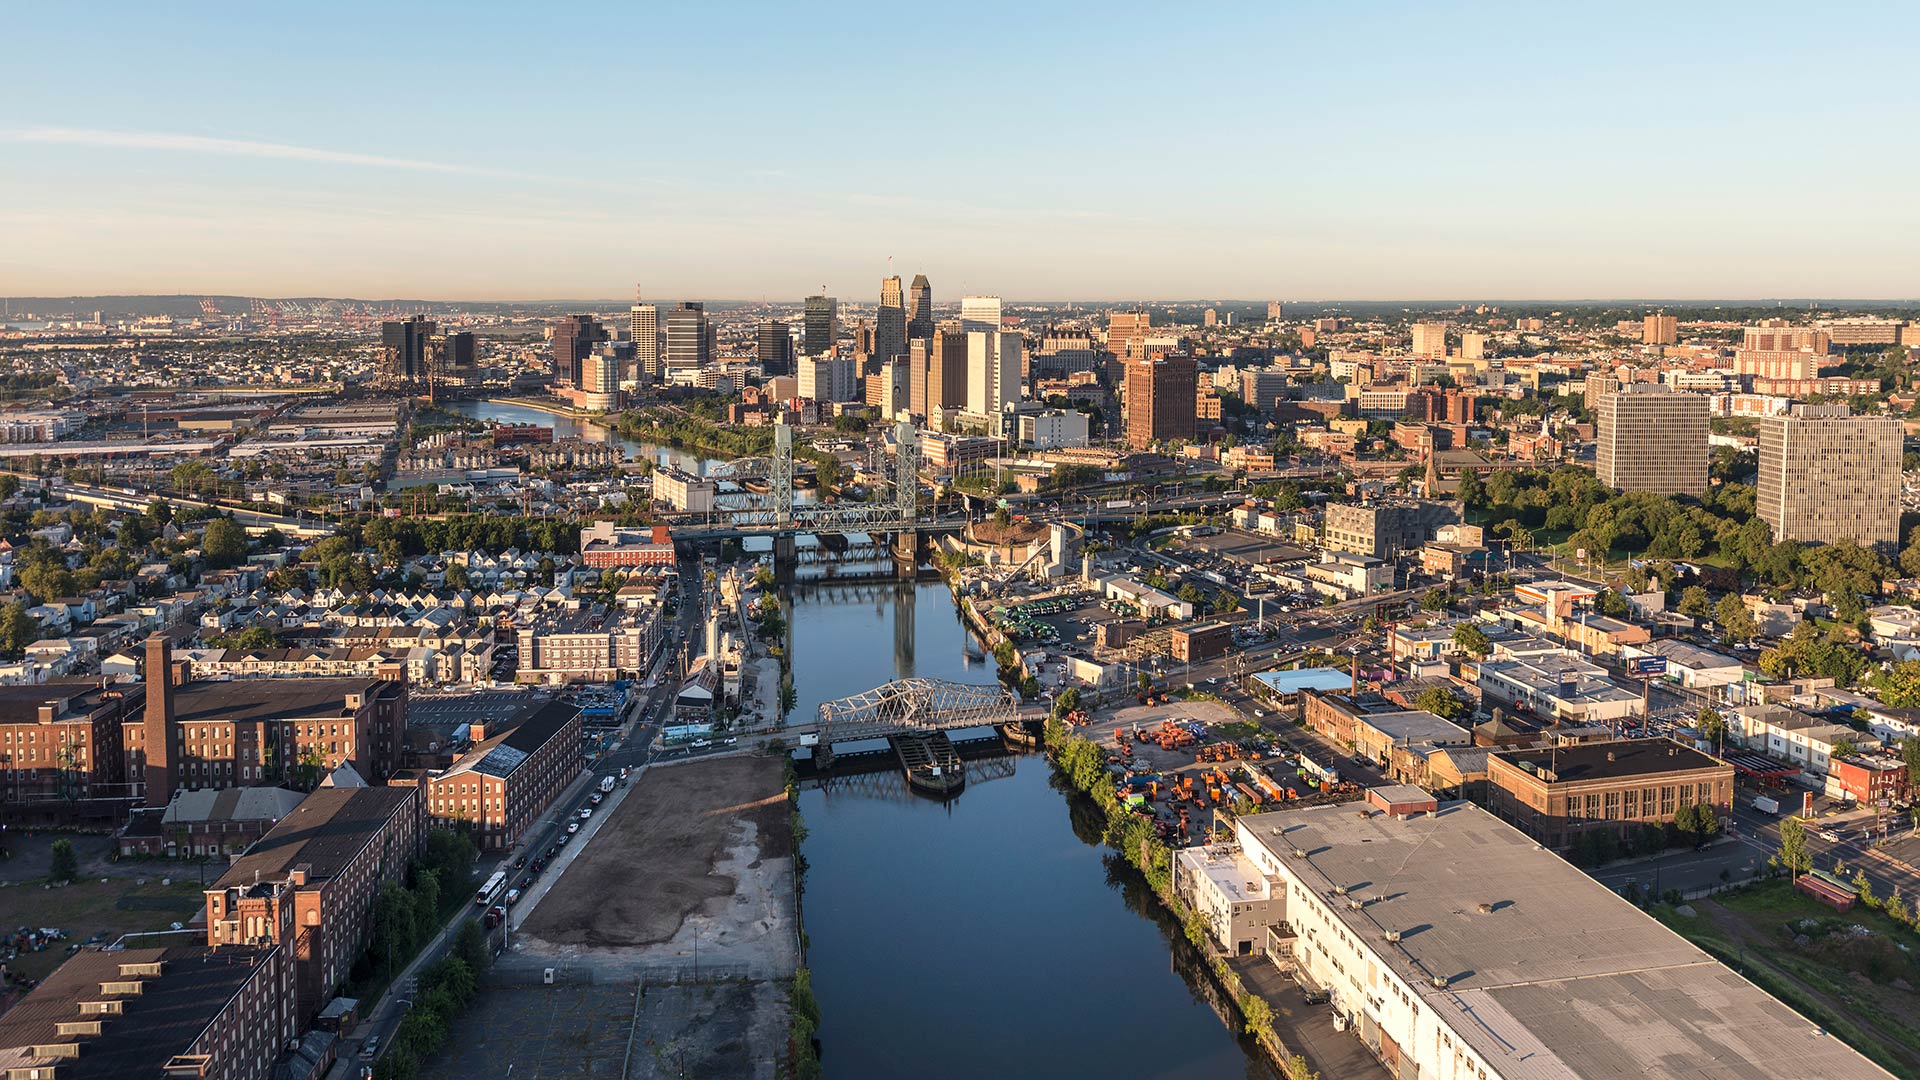 Aerial view of a river and the skyline of Newark, New Jersey